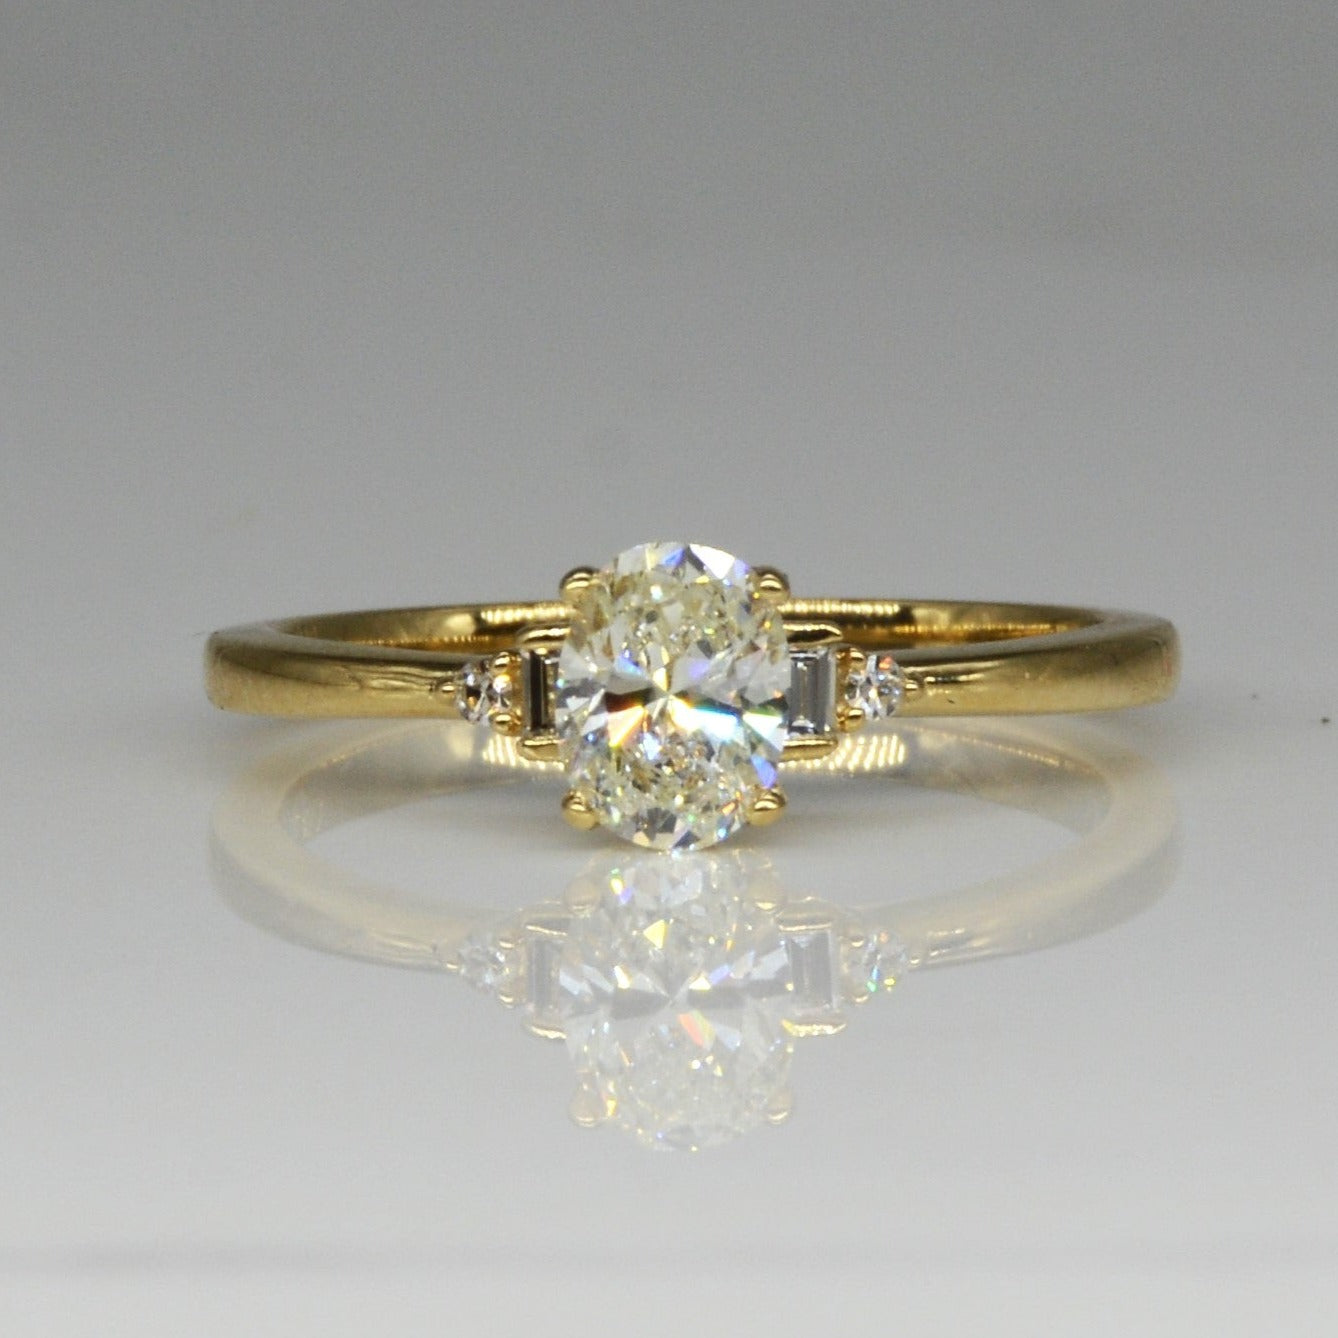 Bespoke' Accented Oval Diamond Engagement Ring | 0.76ctw | SZ 6.75 |